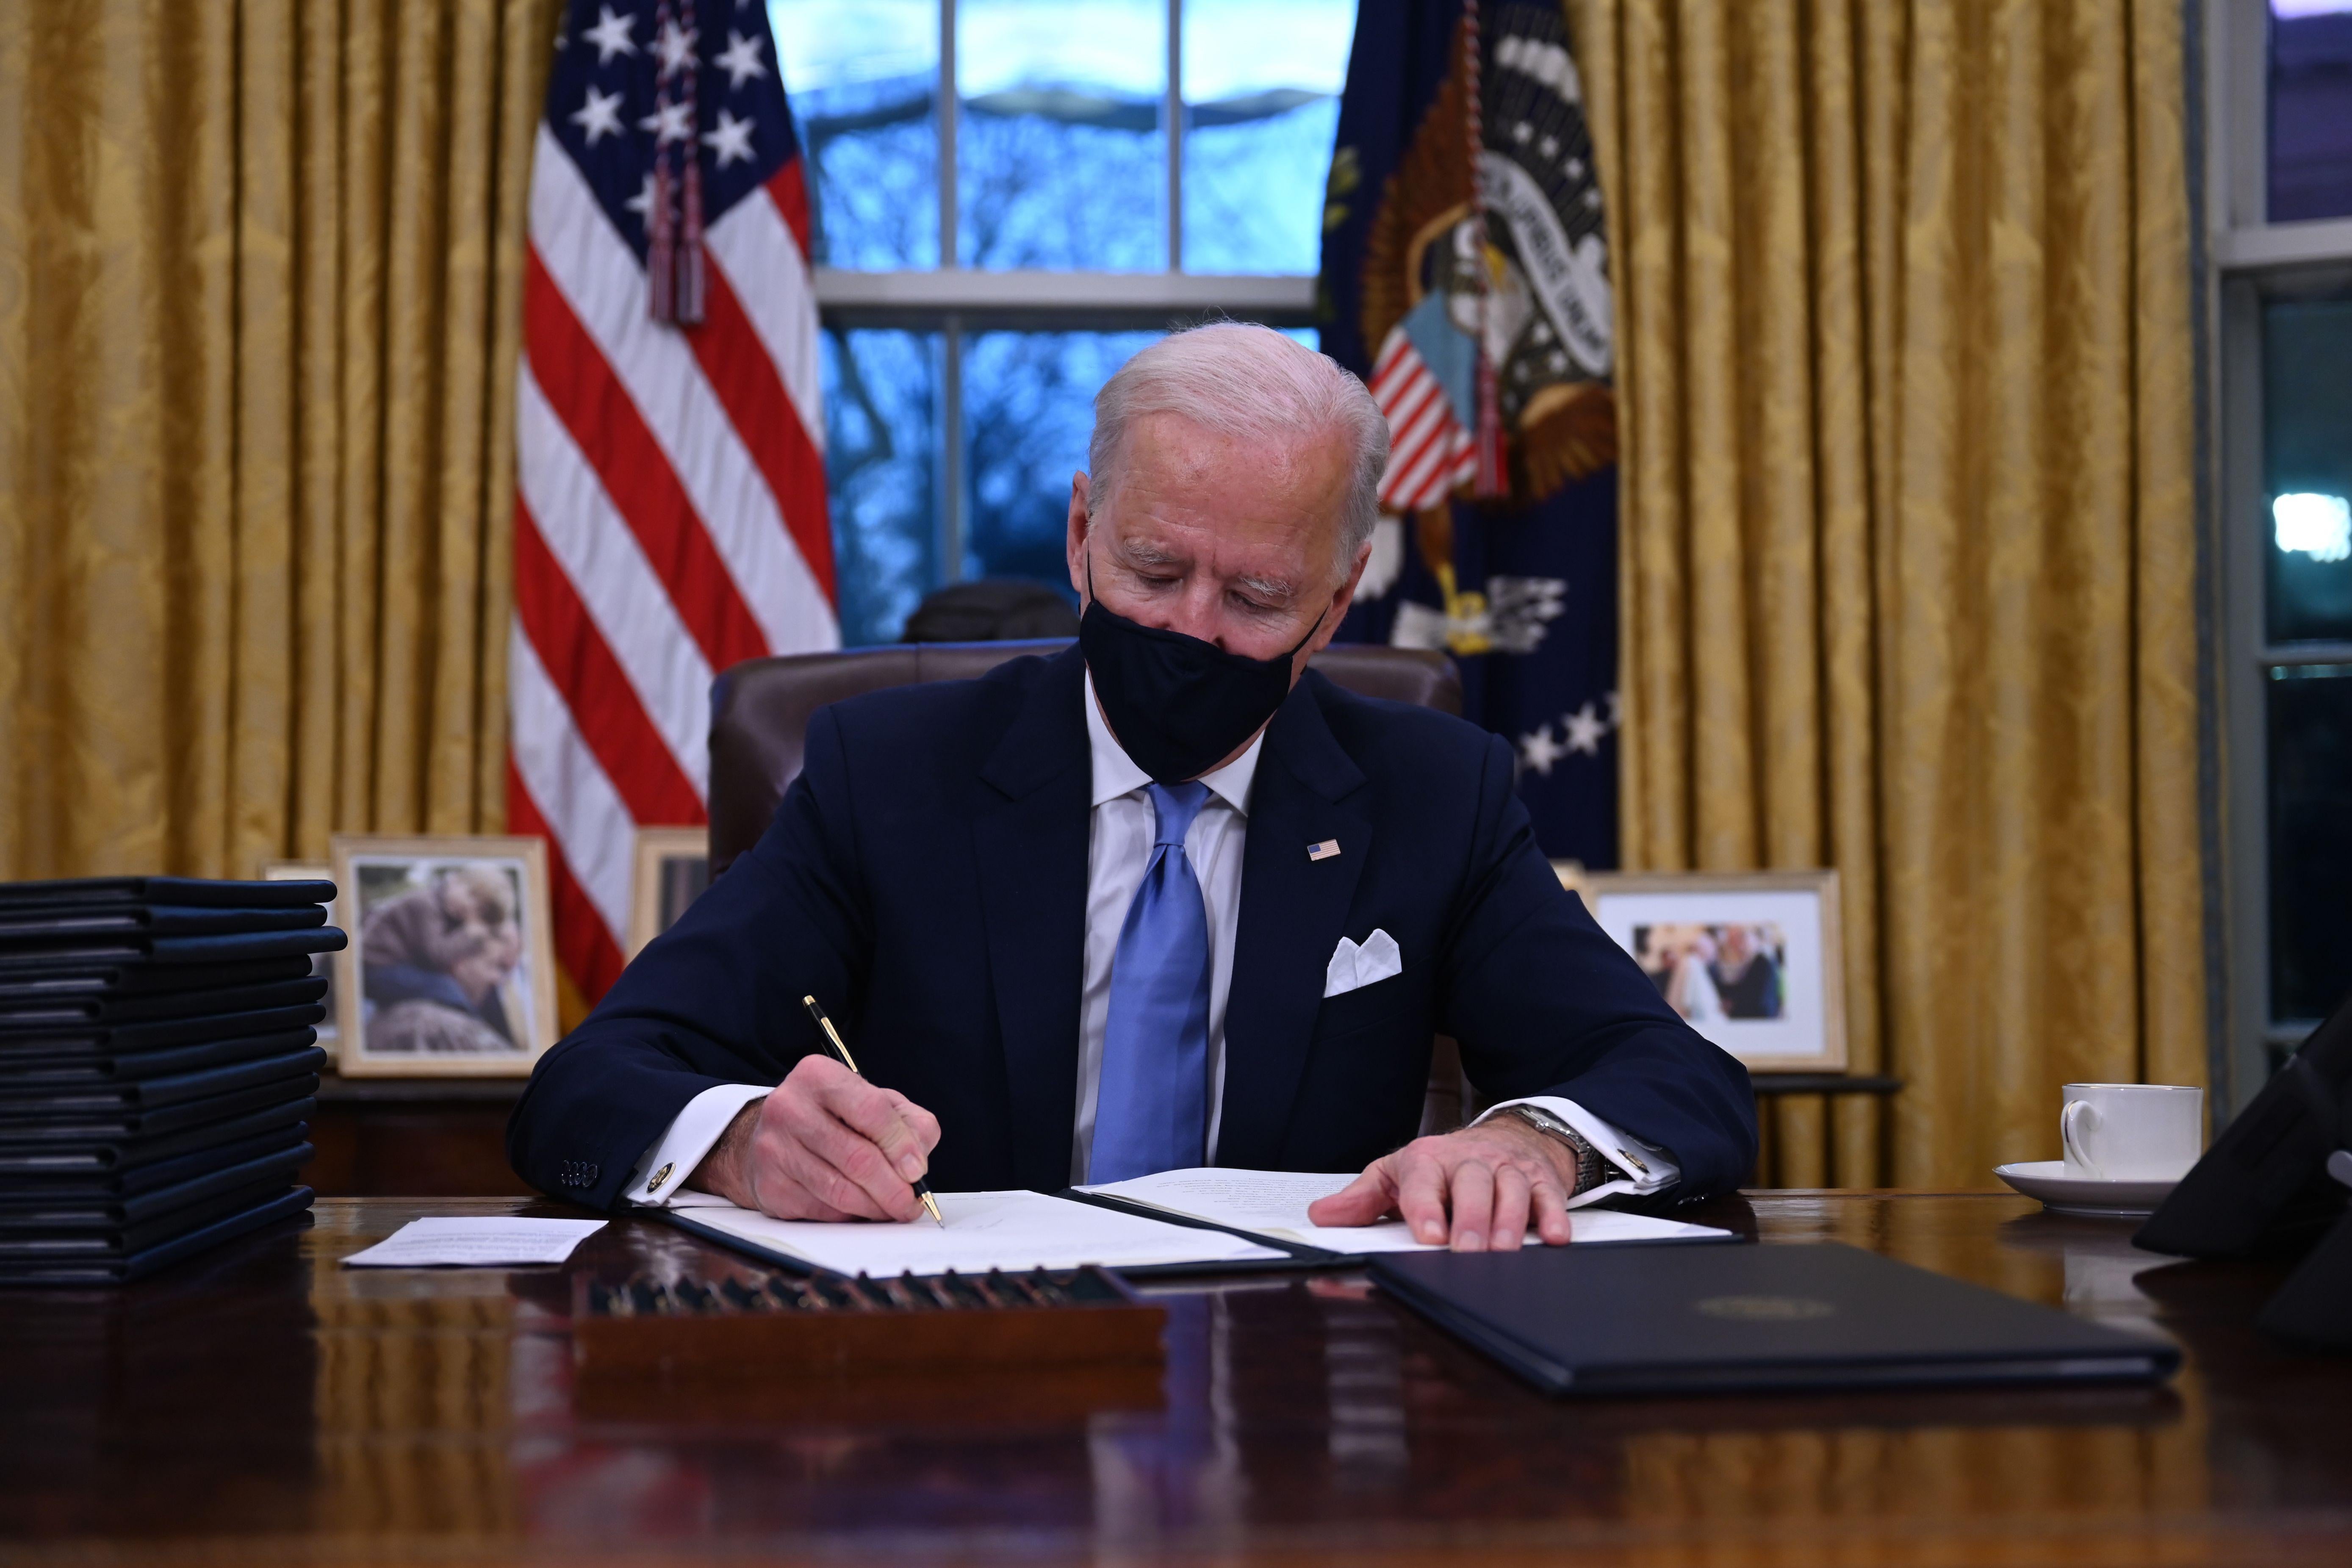 Biden sits in the Oval Office and signs orders.